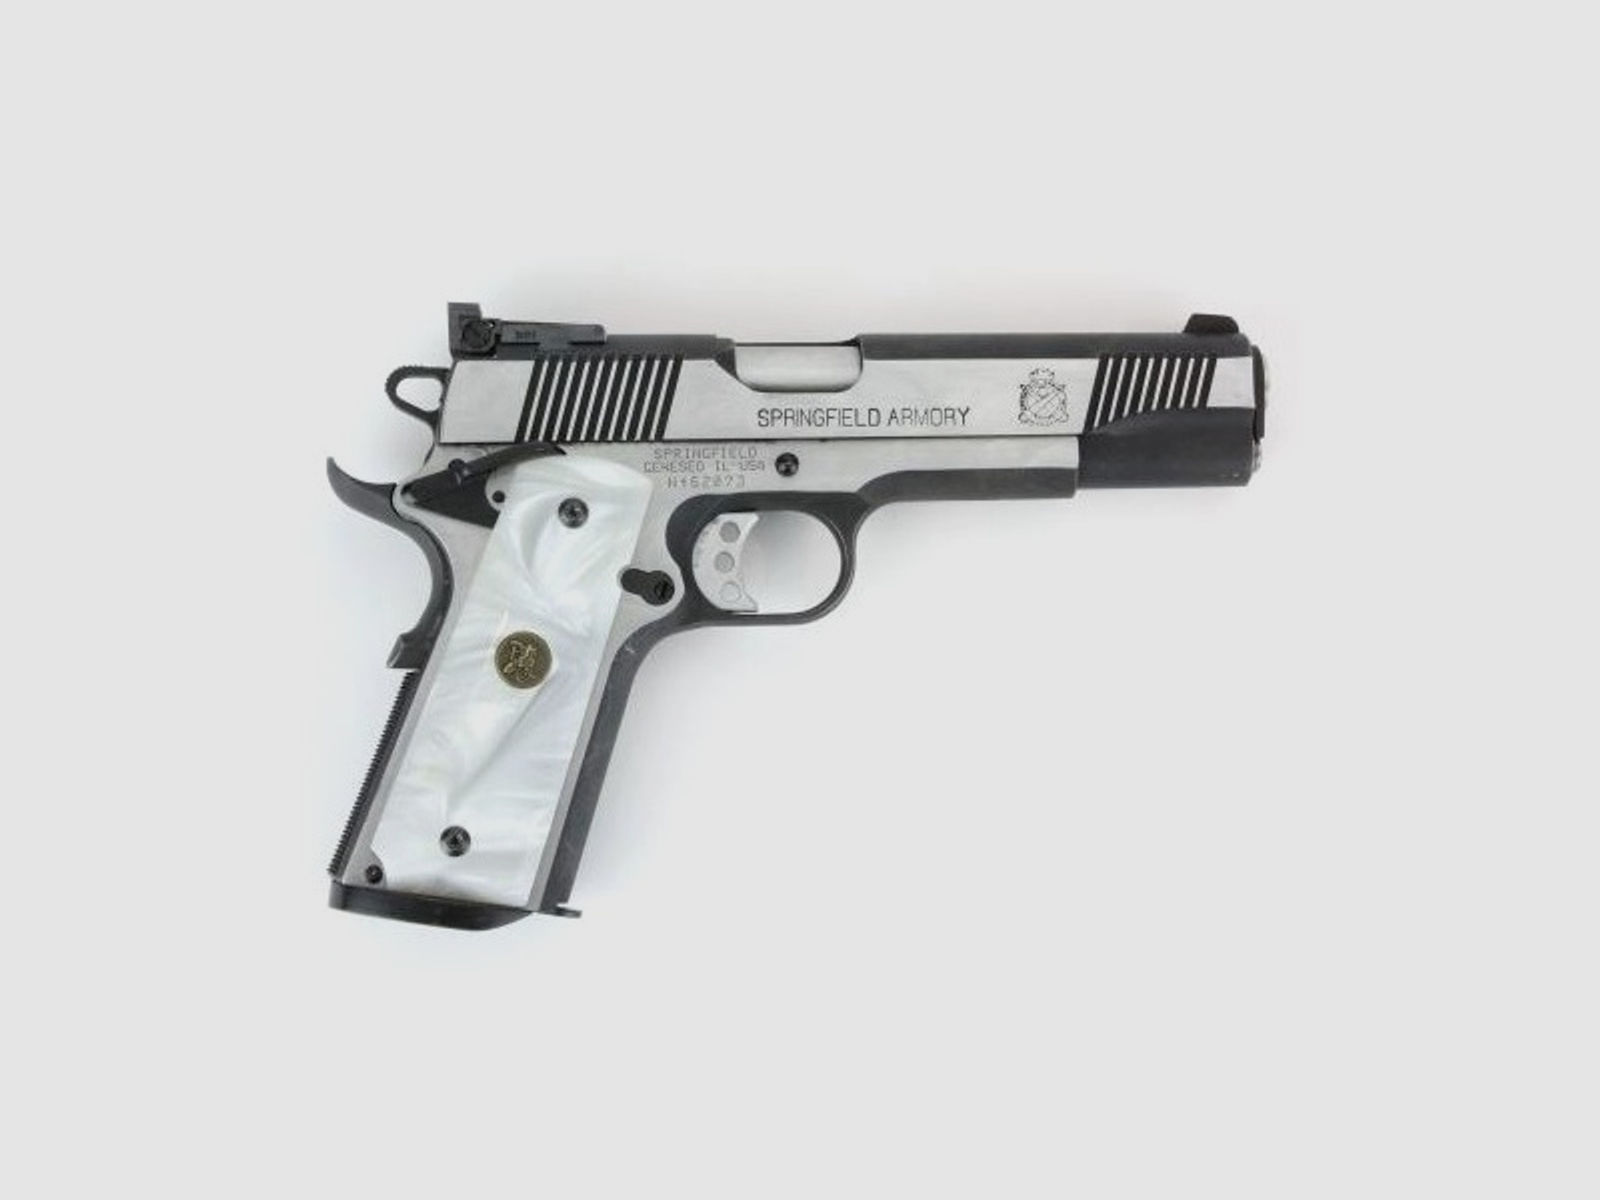 Pachmayr Griff White Pearl Colt 1911A1